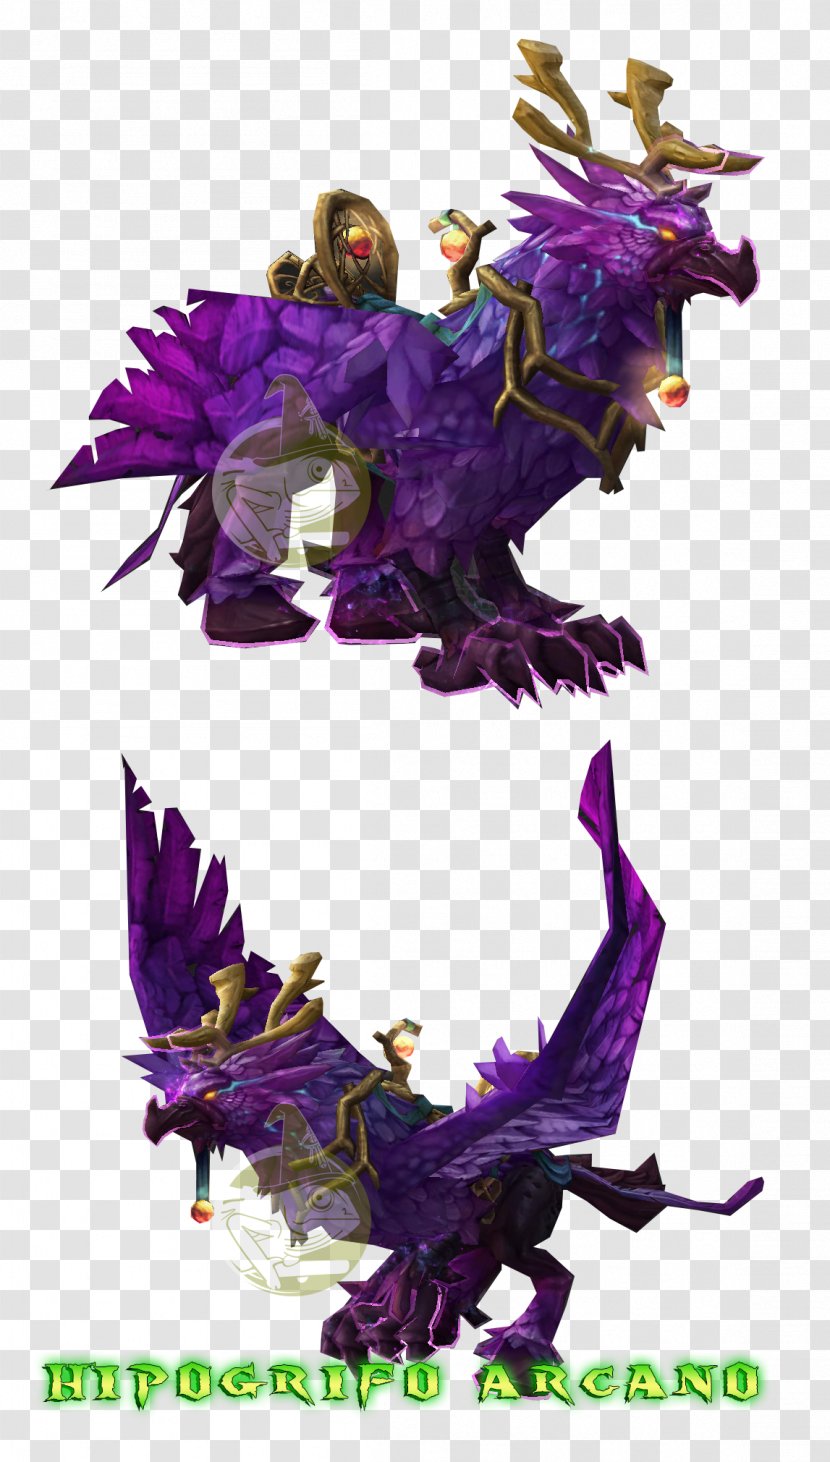 World Of Warcraft: Legion Battle For Azeroth Warcraft III: Reign Chaos Hippogriff Blizzard Entertainment - Saddle - Arcano Transparent PNG